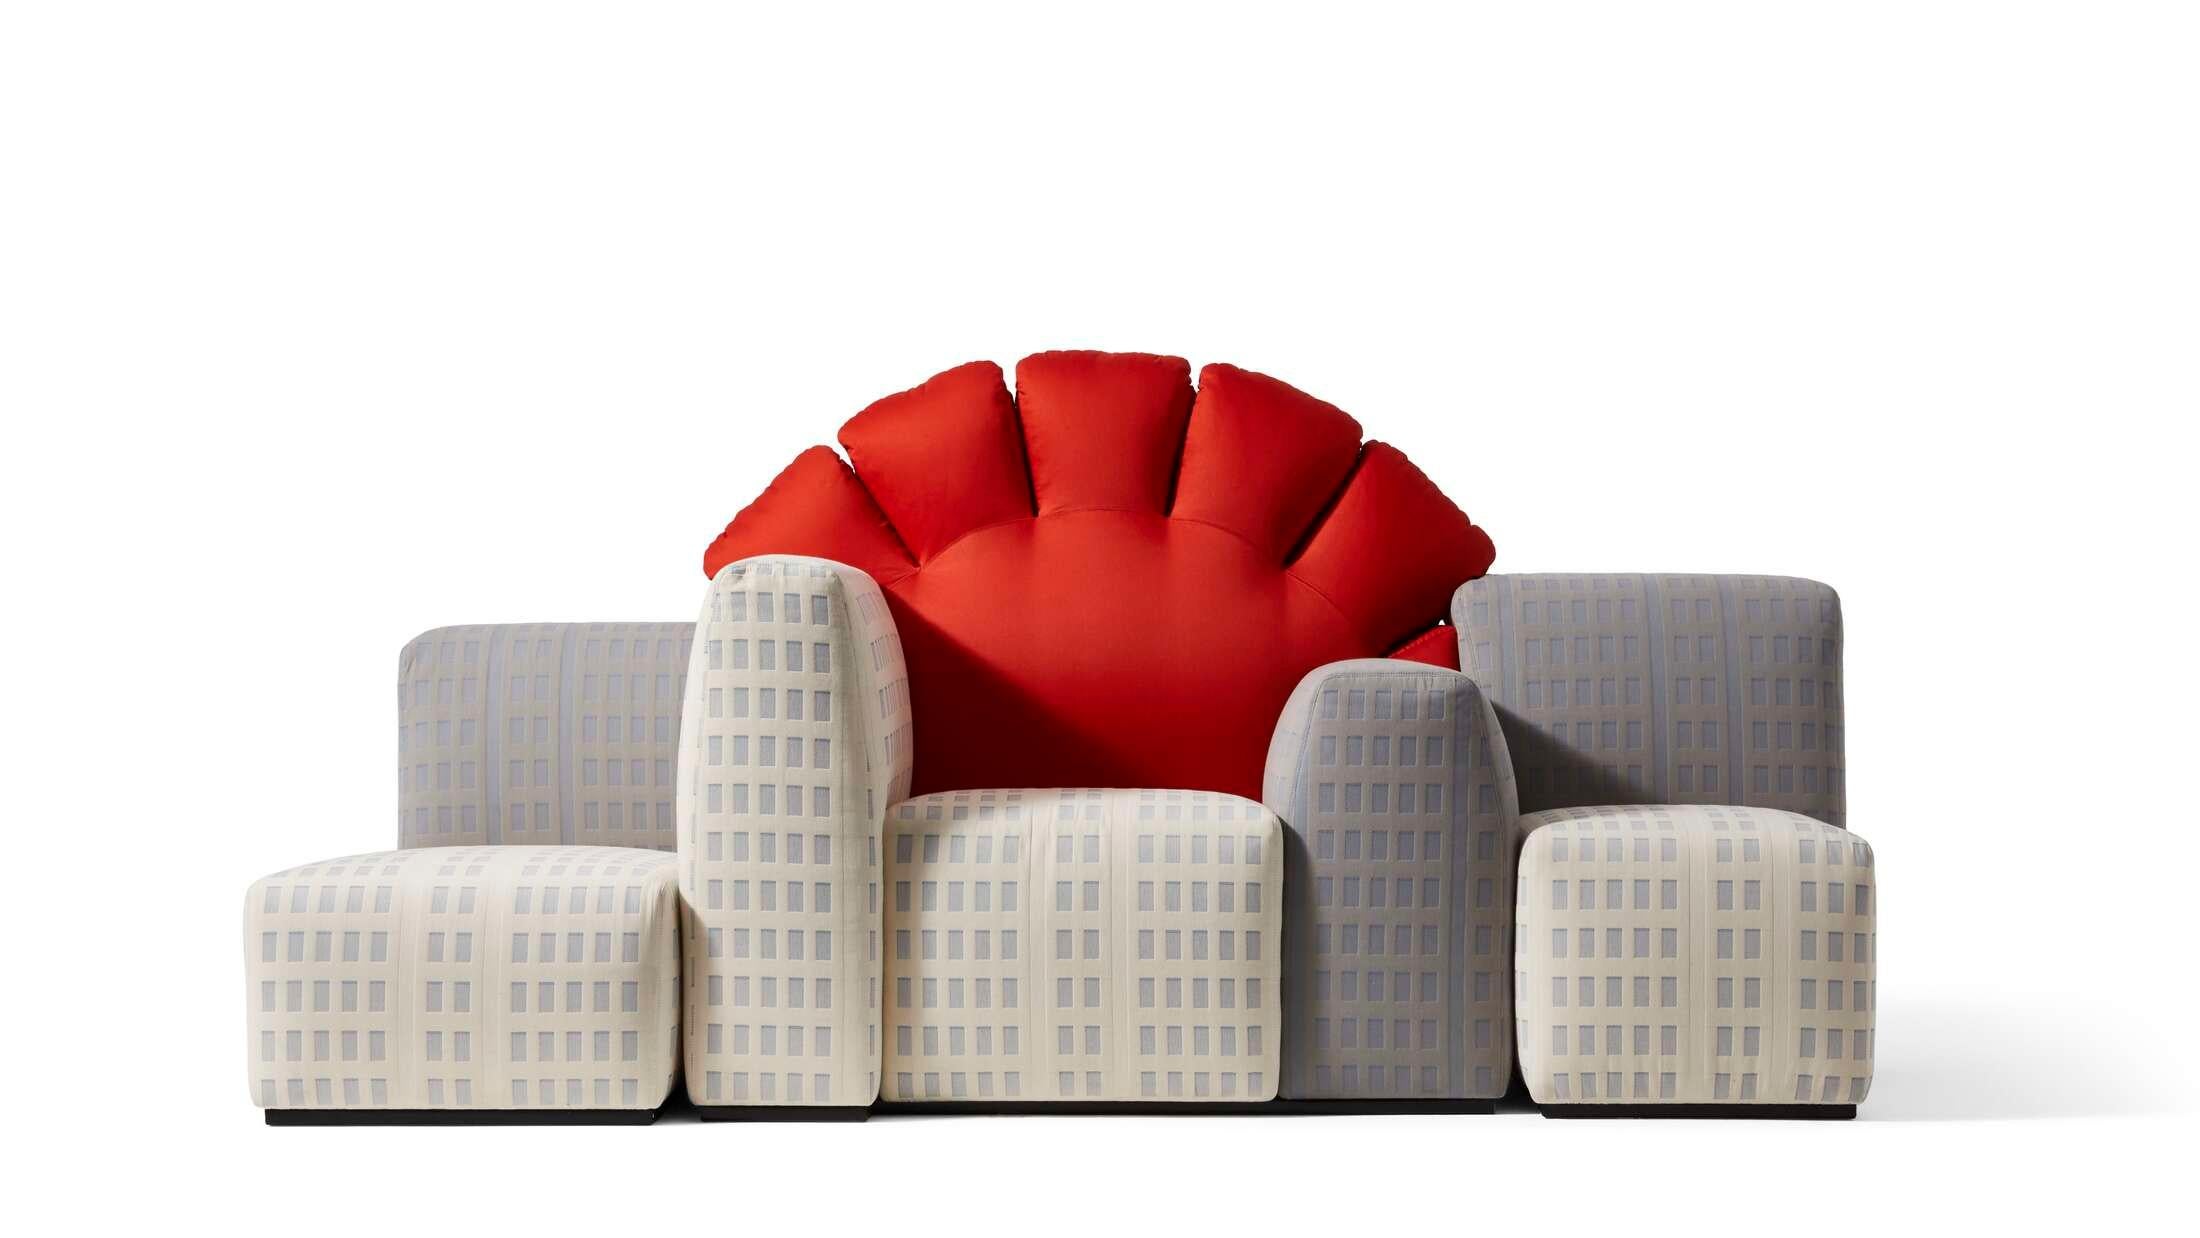 1 of 50 limited edition Tramonto A New York Sofa by Gaetano Pesce for Cassina
For the three-seater sofa, the padded skyscrapers are upholstered in an exclusive fabric with a raised texture that juxtaposes light and shadow, creating the effect of